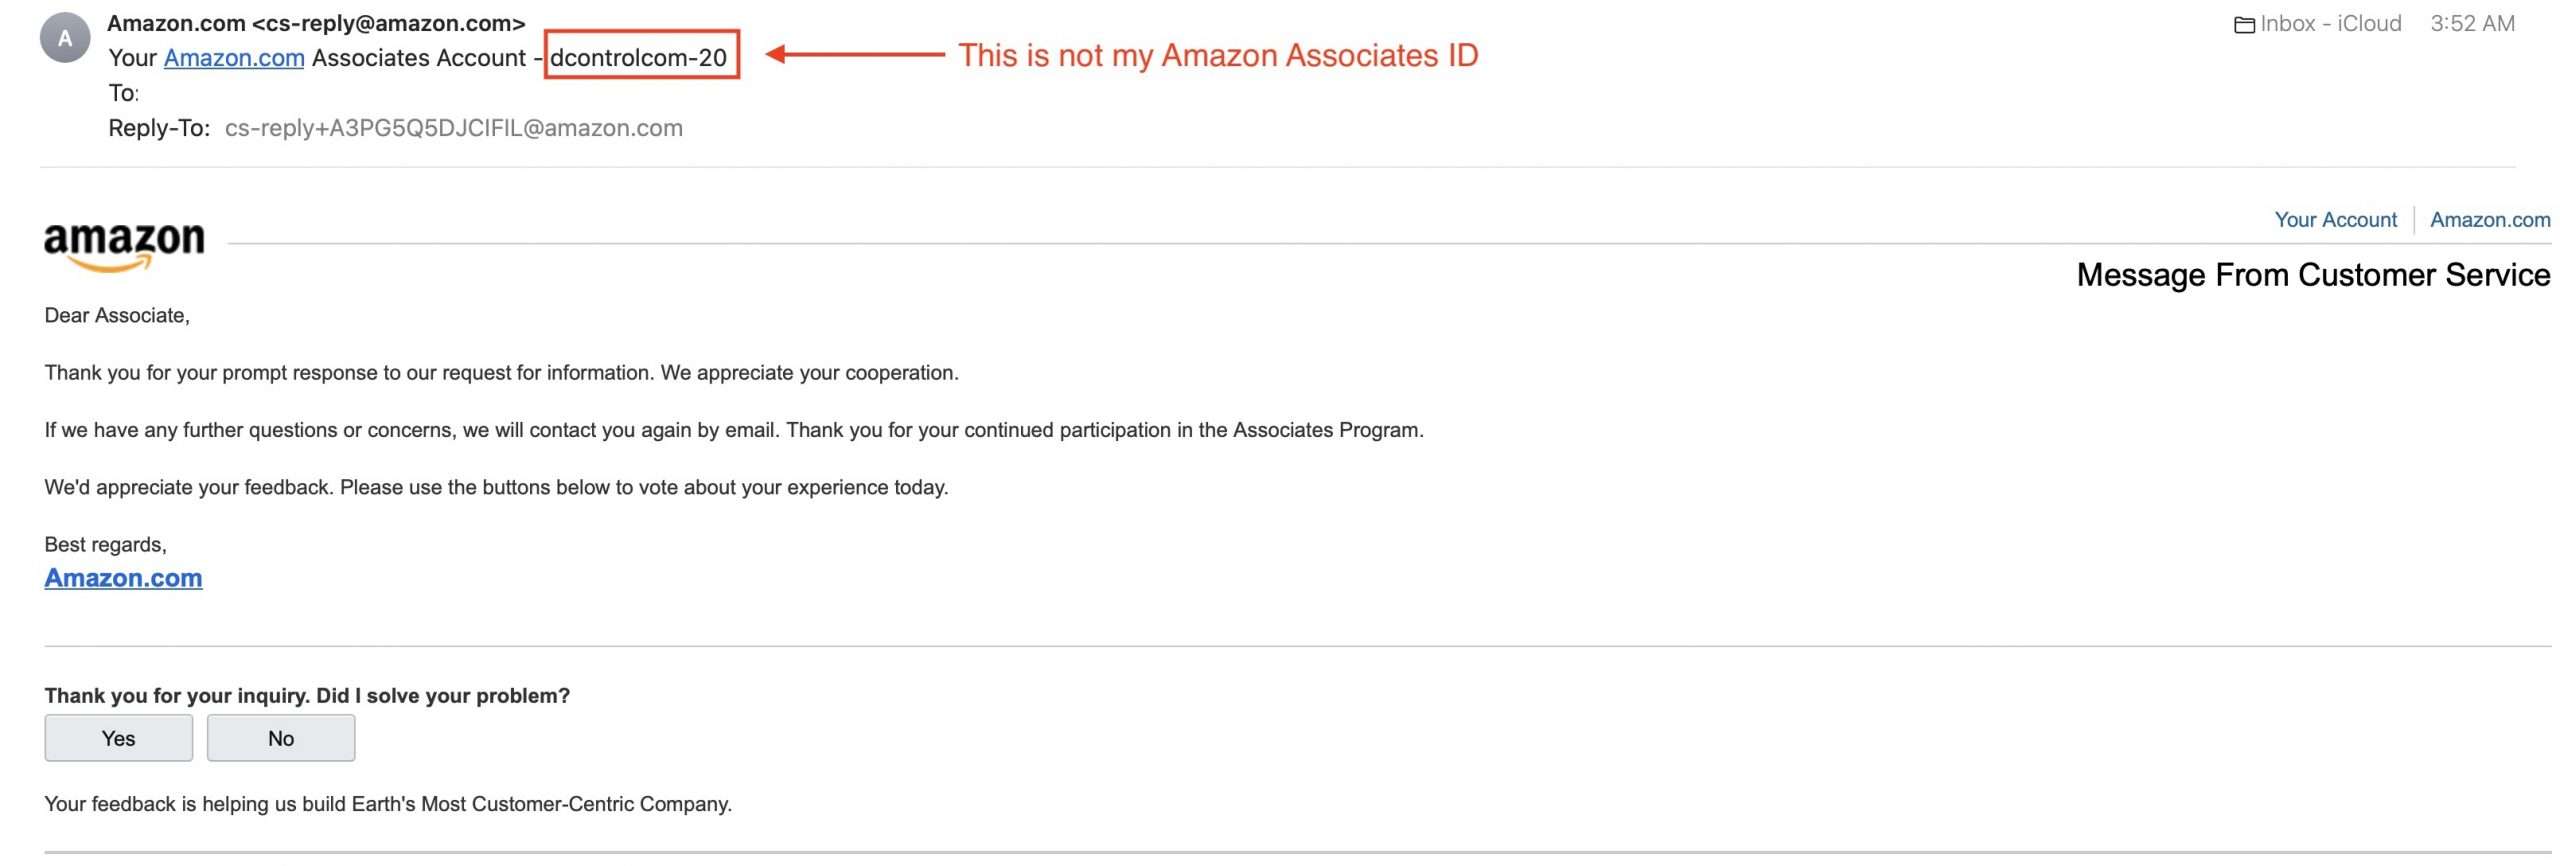 When I appealed my case with the Amazon Associates program, they replied to my email with someone else’s Amazon Associates ID. Huh?